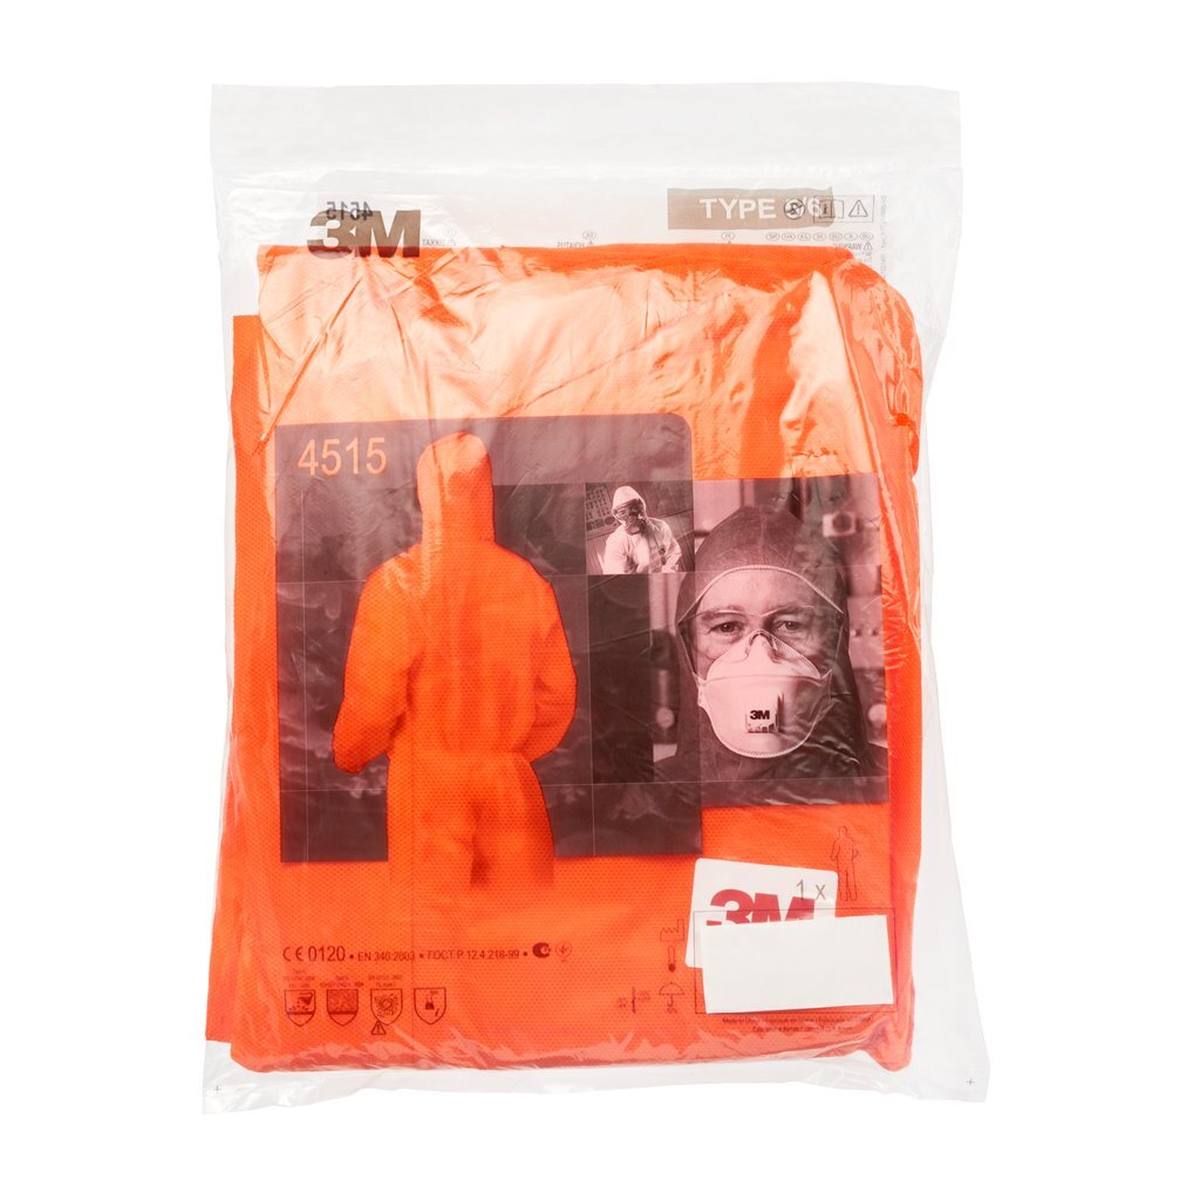 3M 4515O Protective suit, orange, TYPE 5/6, size M, material SMMS low-lint, elasticated cuffs